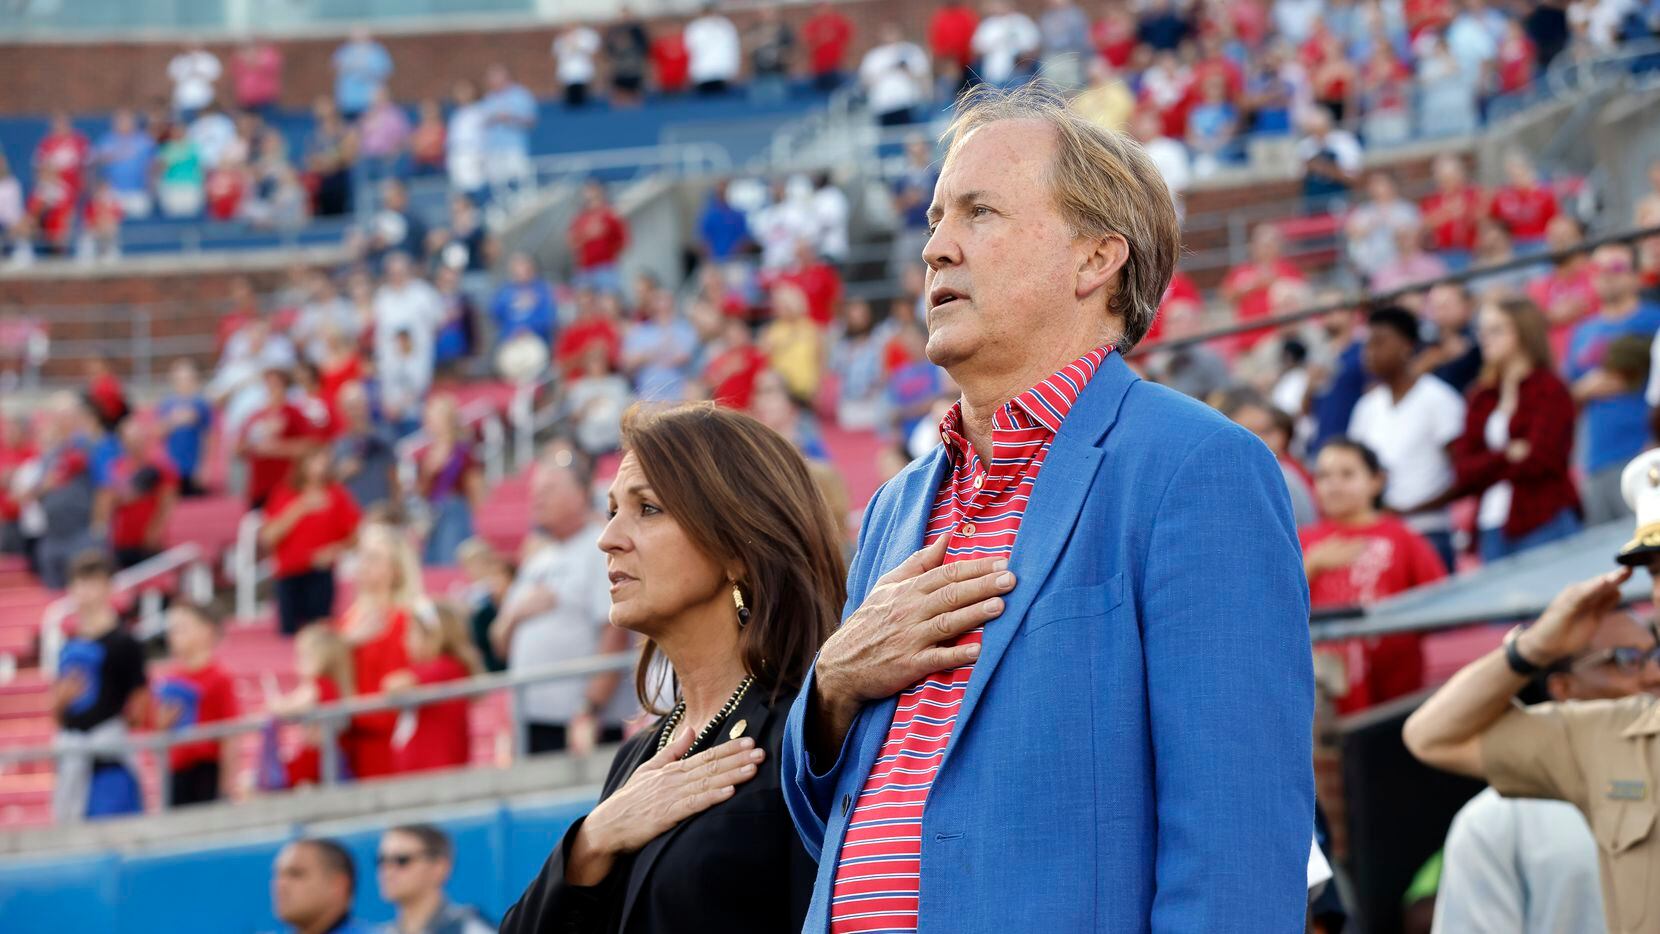 Texas Attorney General Ken Paxton sings the national anthem alongside his wife Angela Paxton...